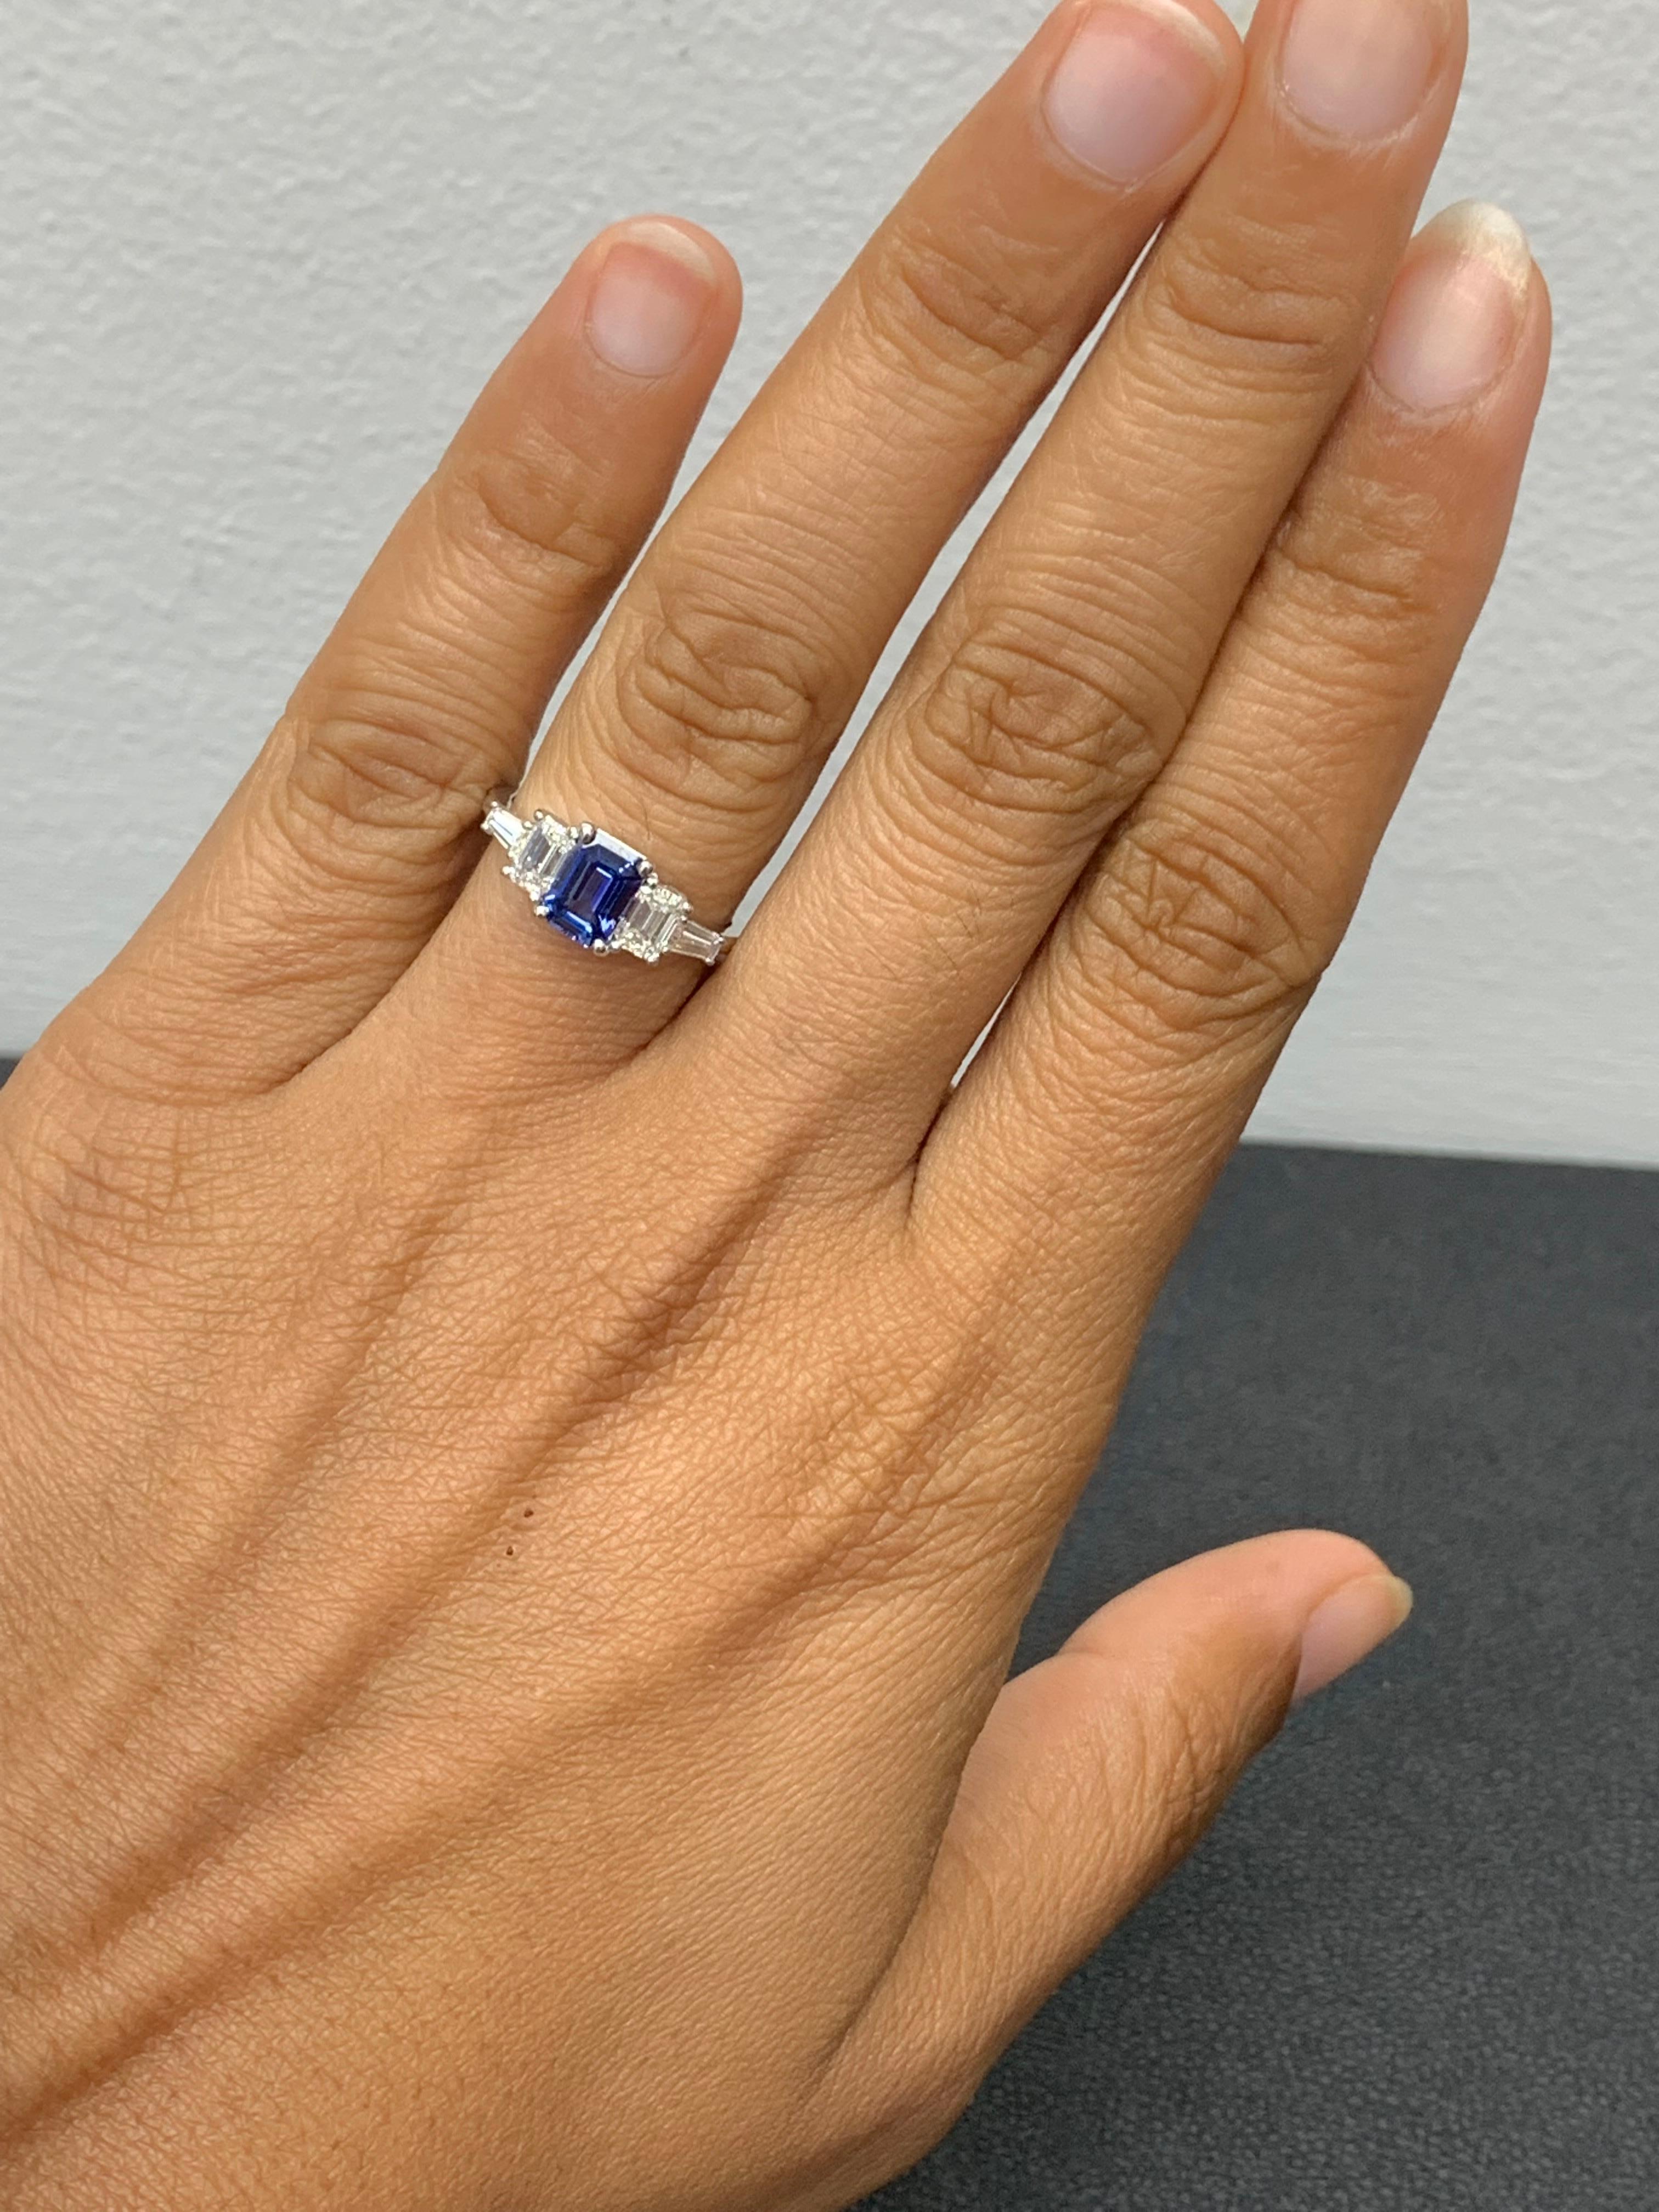 1.12 Carat Emerald Cut Blue Sapphire and Diamond 5 Stone Ring in 14K White Gold For Sale 1